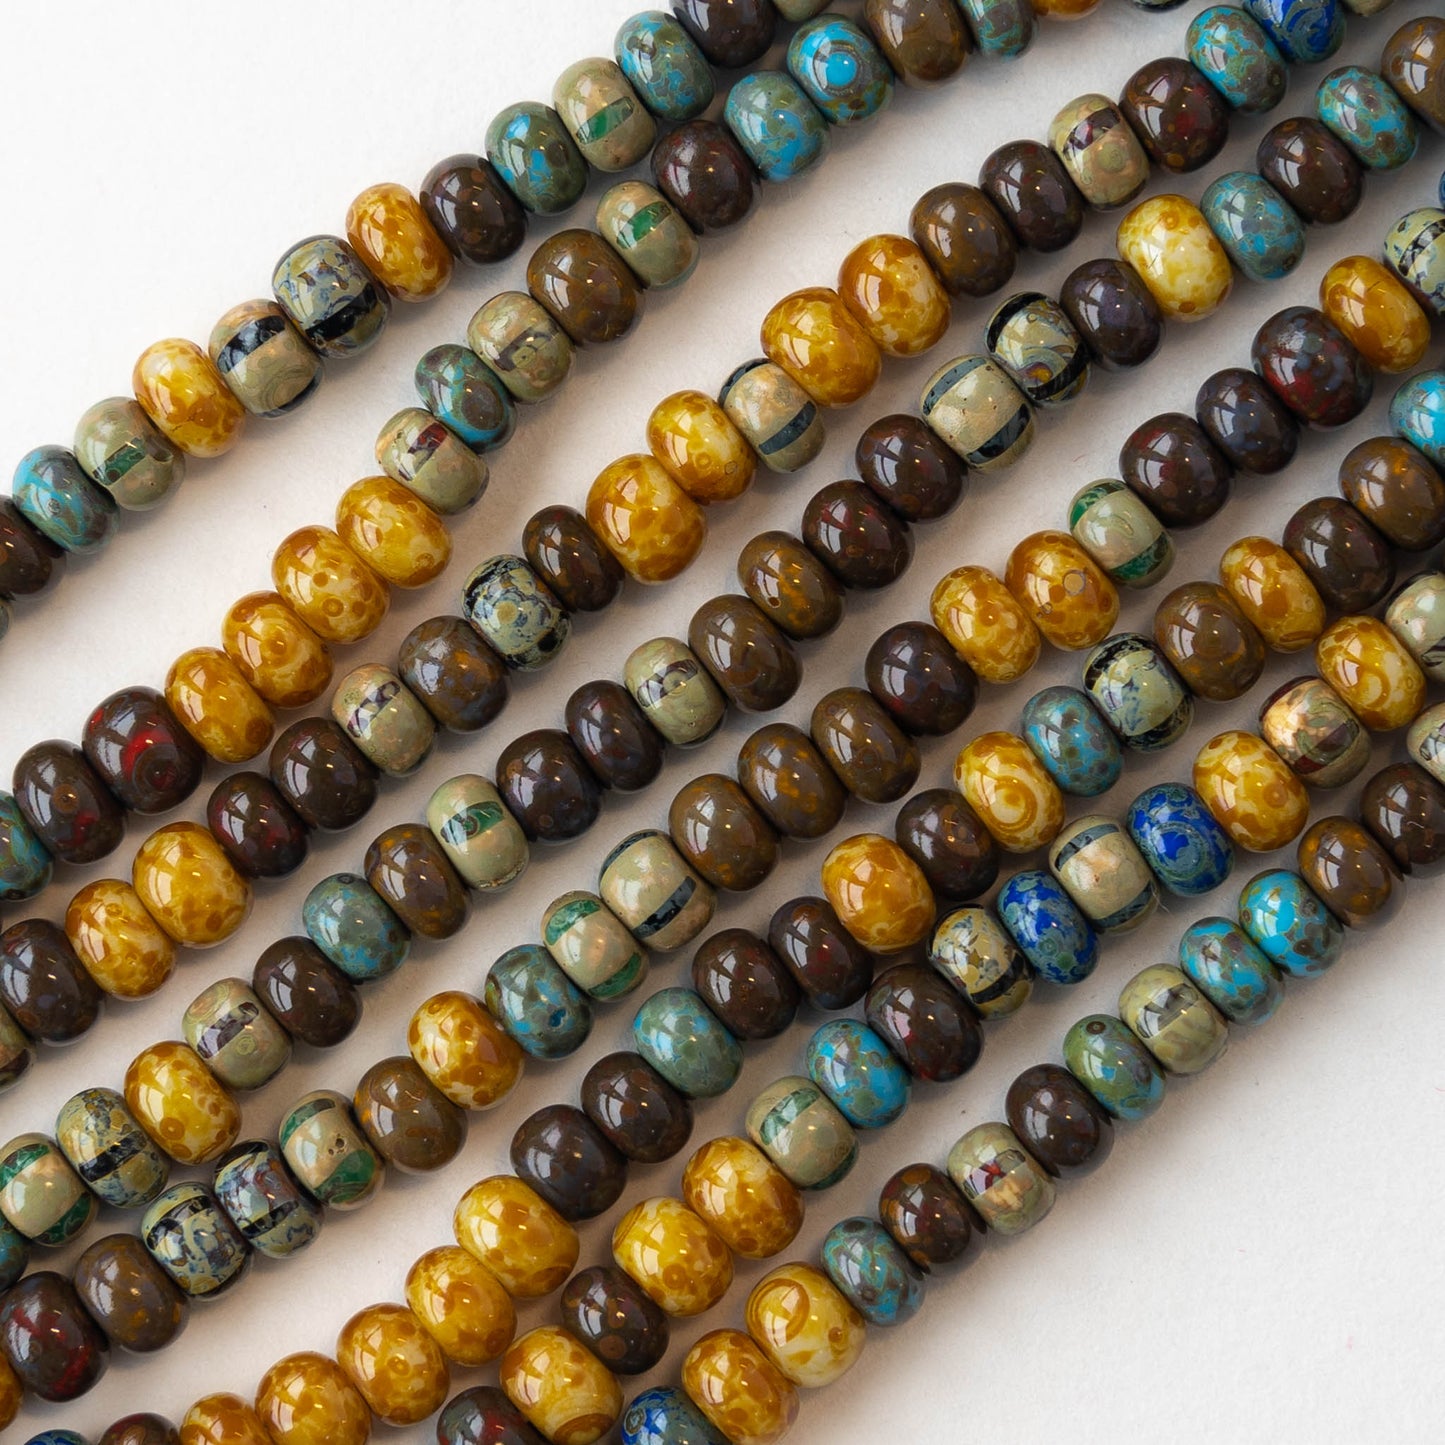 4 Seed Beads - Aged Caribbean Striped Picasso Mix - 20 or 60"